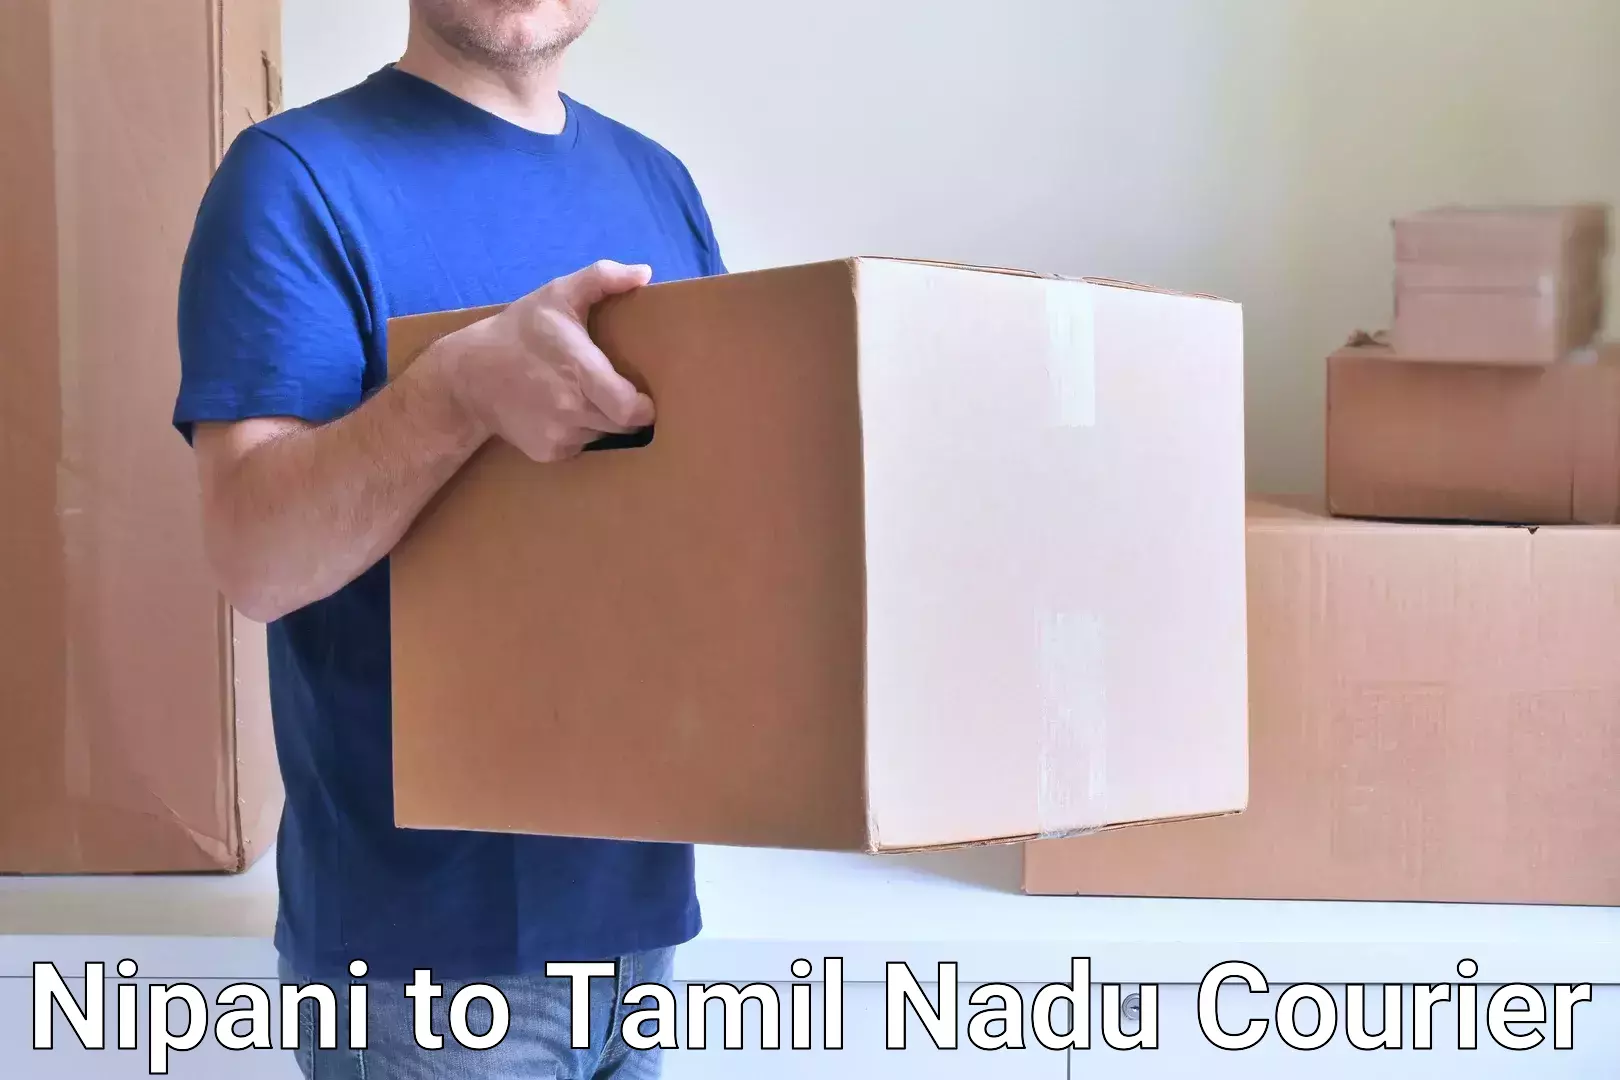 State-of-the-art courier technology Nipani to Tamil Nadu